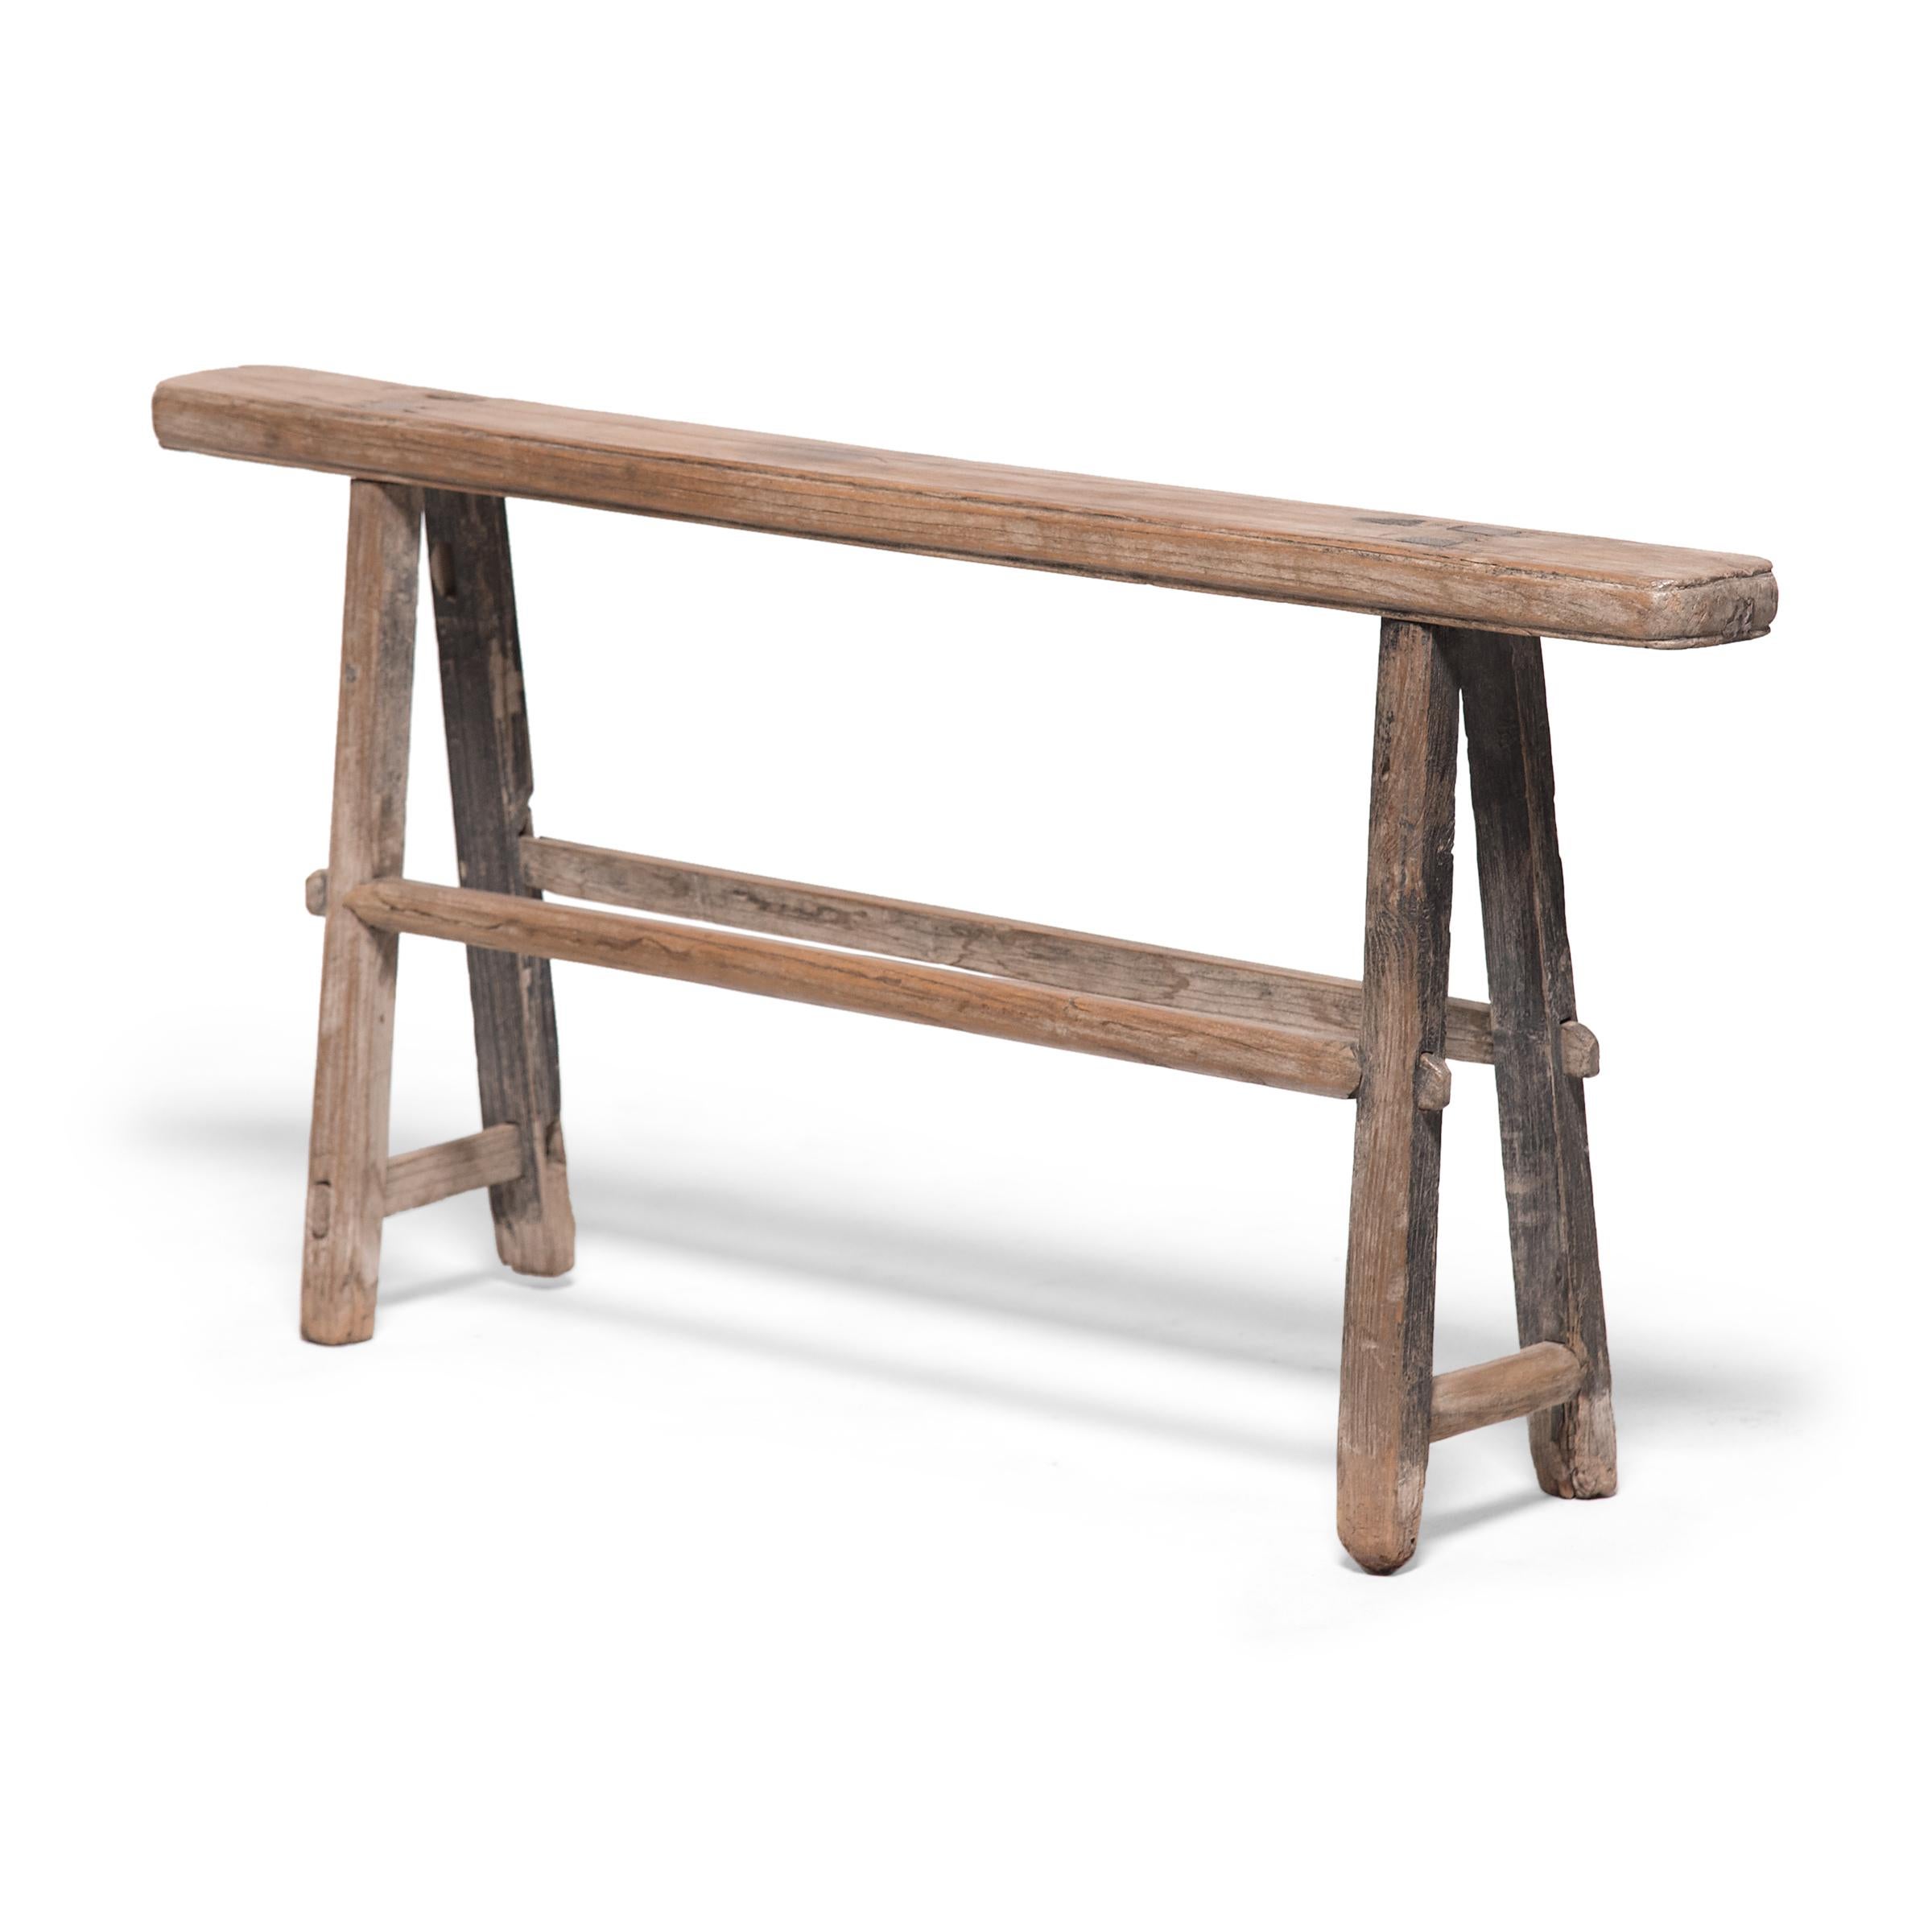 Rustic Petite Chinese Carriage Bench, circa 1900